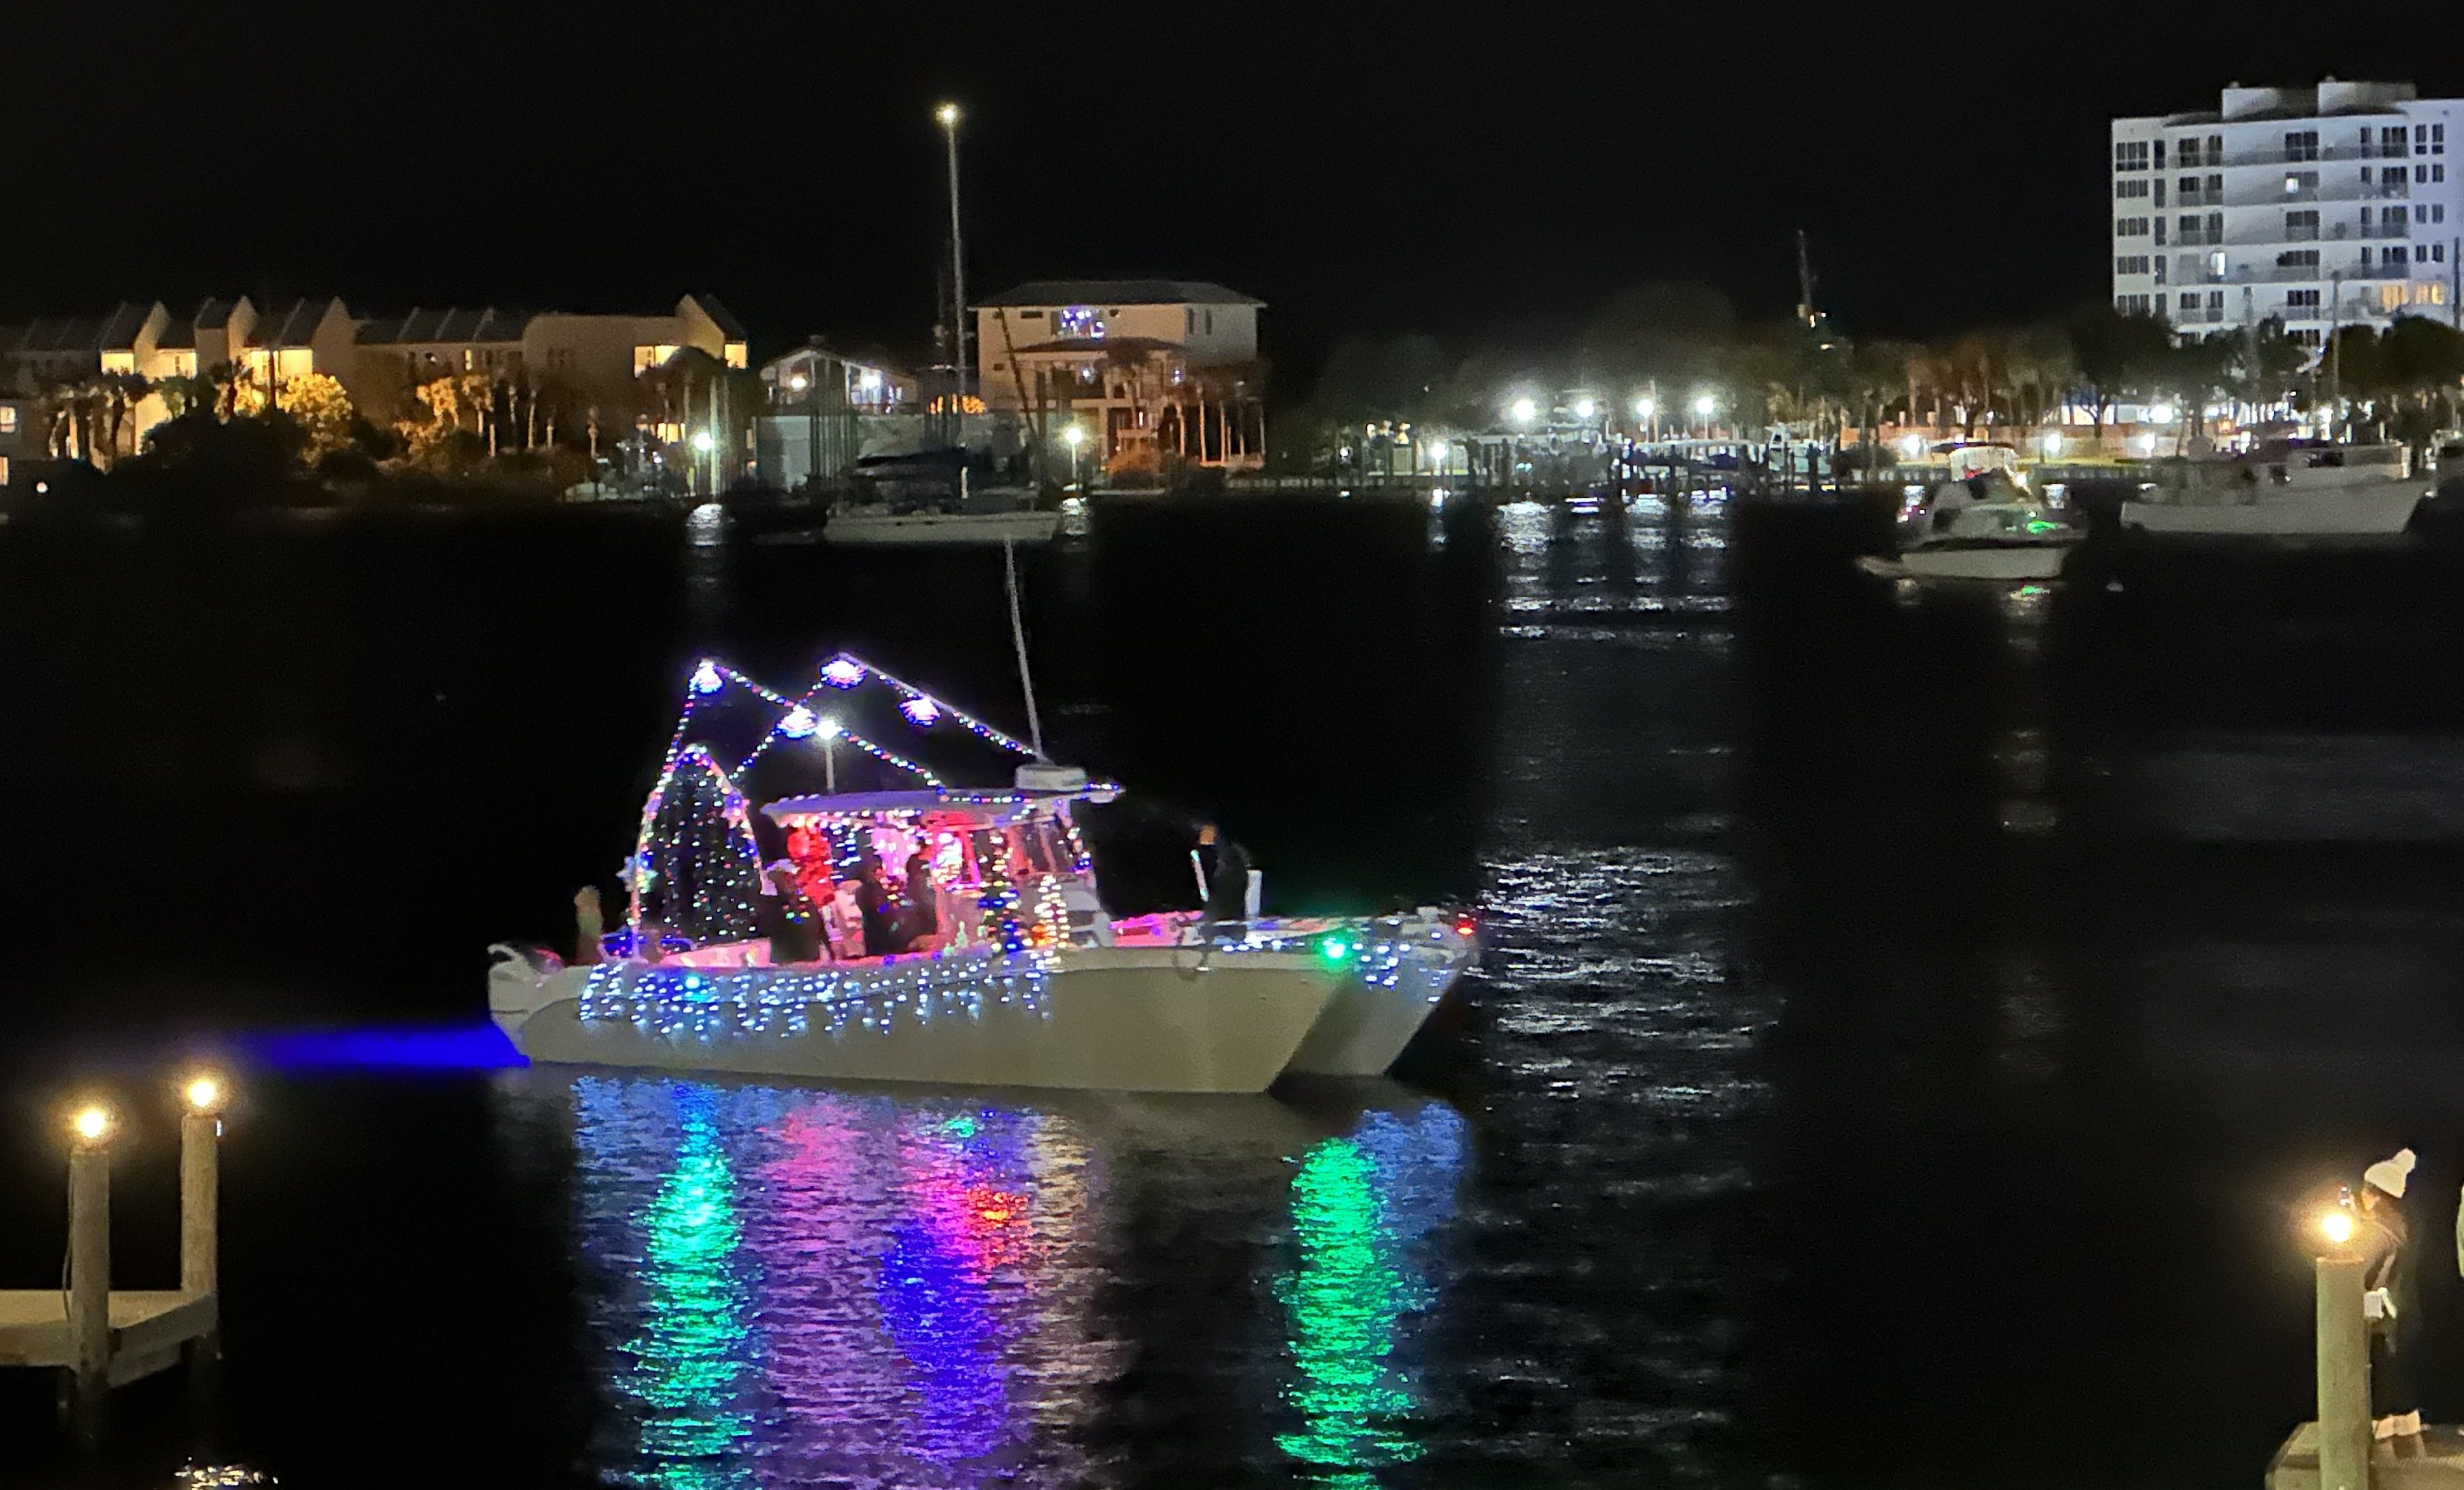 Nearly 40 boats participated in the 37th annual Holiday on the Harbor Boat Parade sponsored by the Destin History and Fishing Museum on Sunday night.